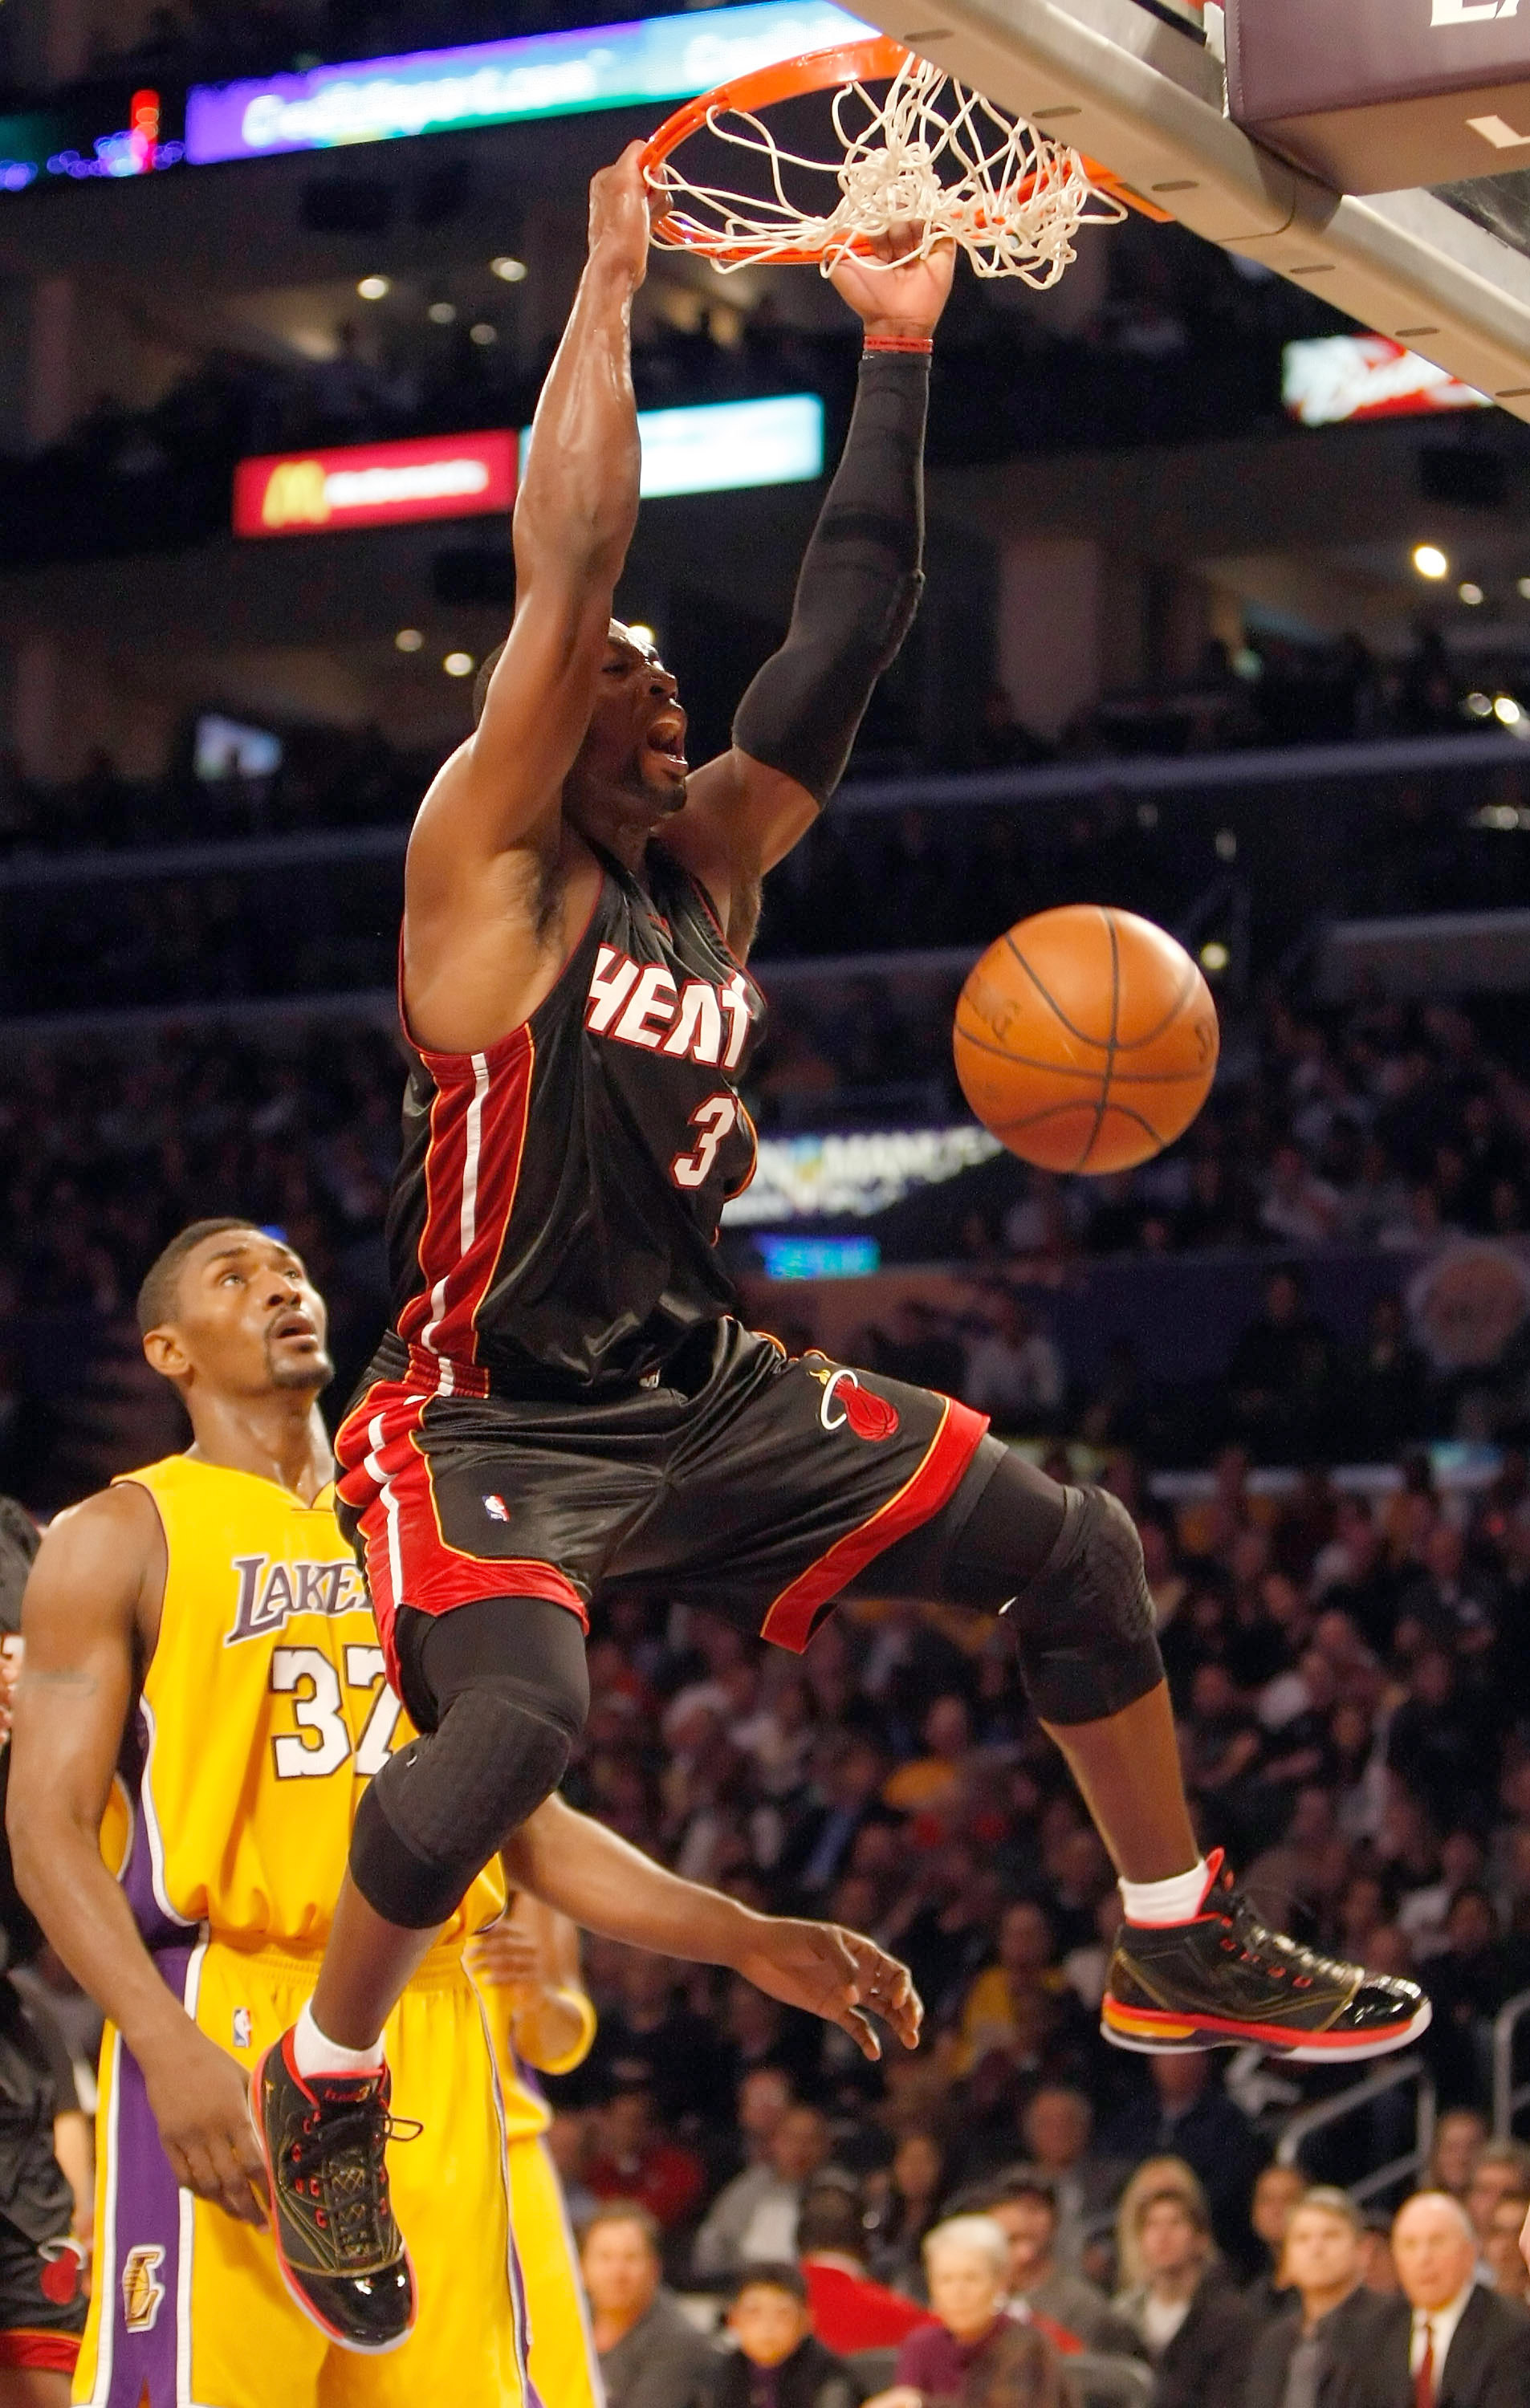 LOS ANGELES, CA - DECEMBER 04:  Dwyane Wade #3 of the Miami Heat dunks the ball in front of Ron Artest #37 of the Los Angeles Lakers in the first half at Staples Center on December 4, 2009 in Los Angeles, California. NOTE TO USER: User expressly acknowled